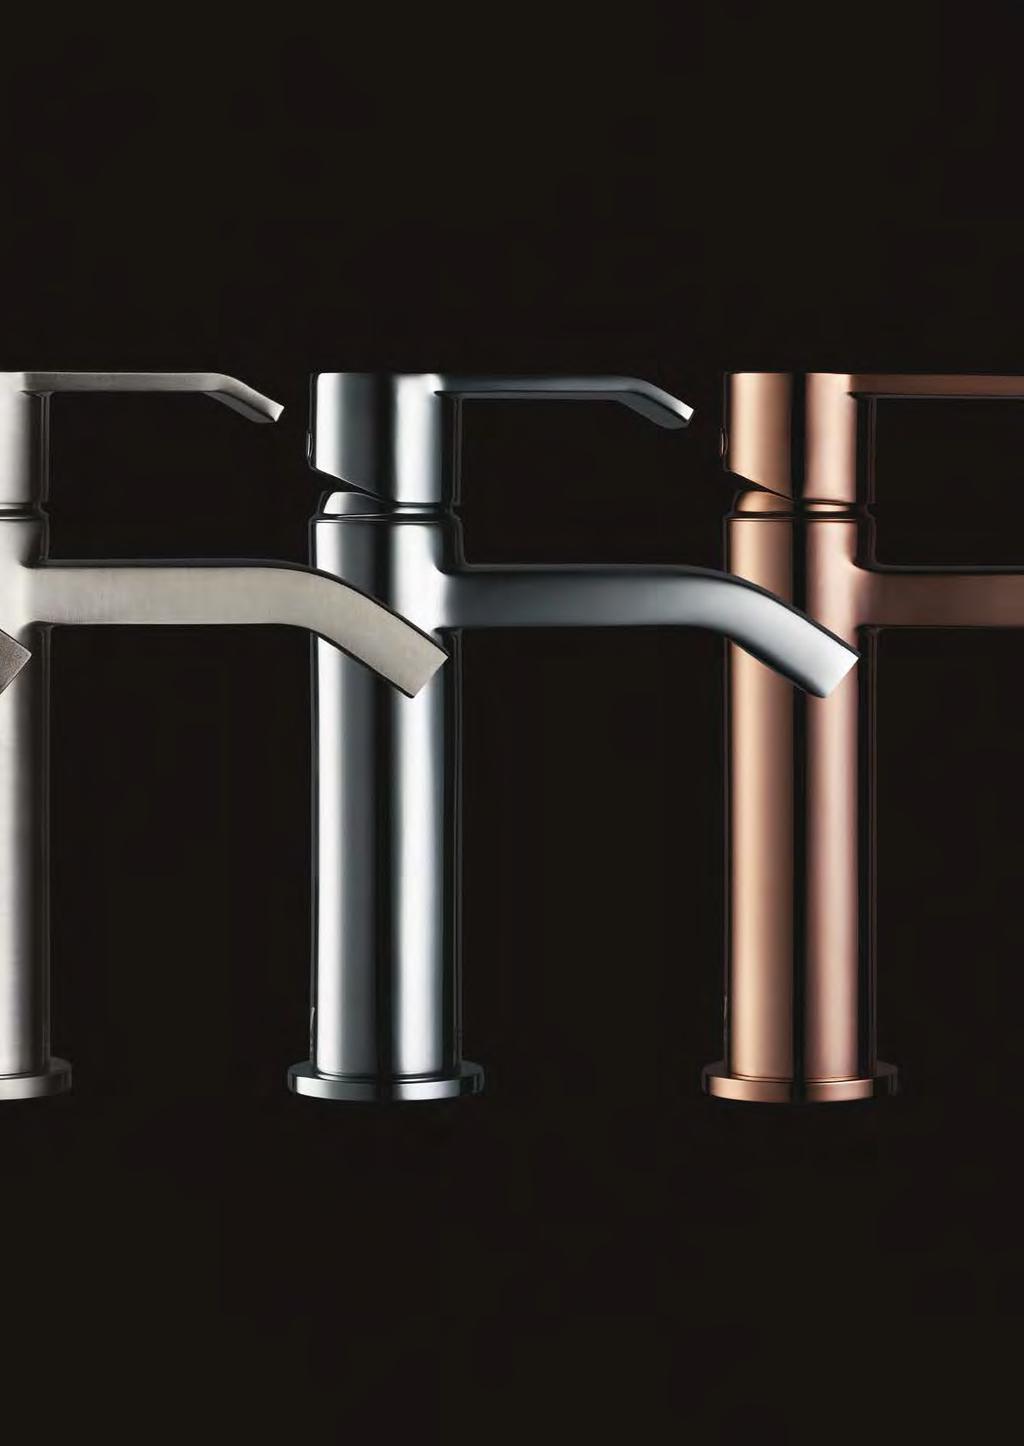 STILE STILE IS ITALIAN FOR STYLE The new STILE tapware collection from Gareth Ashton